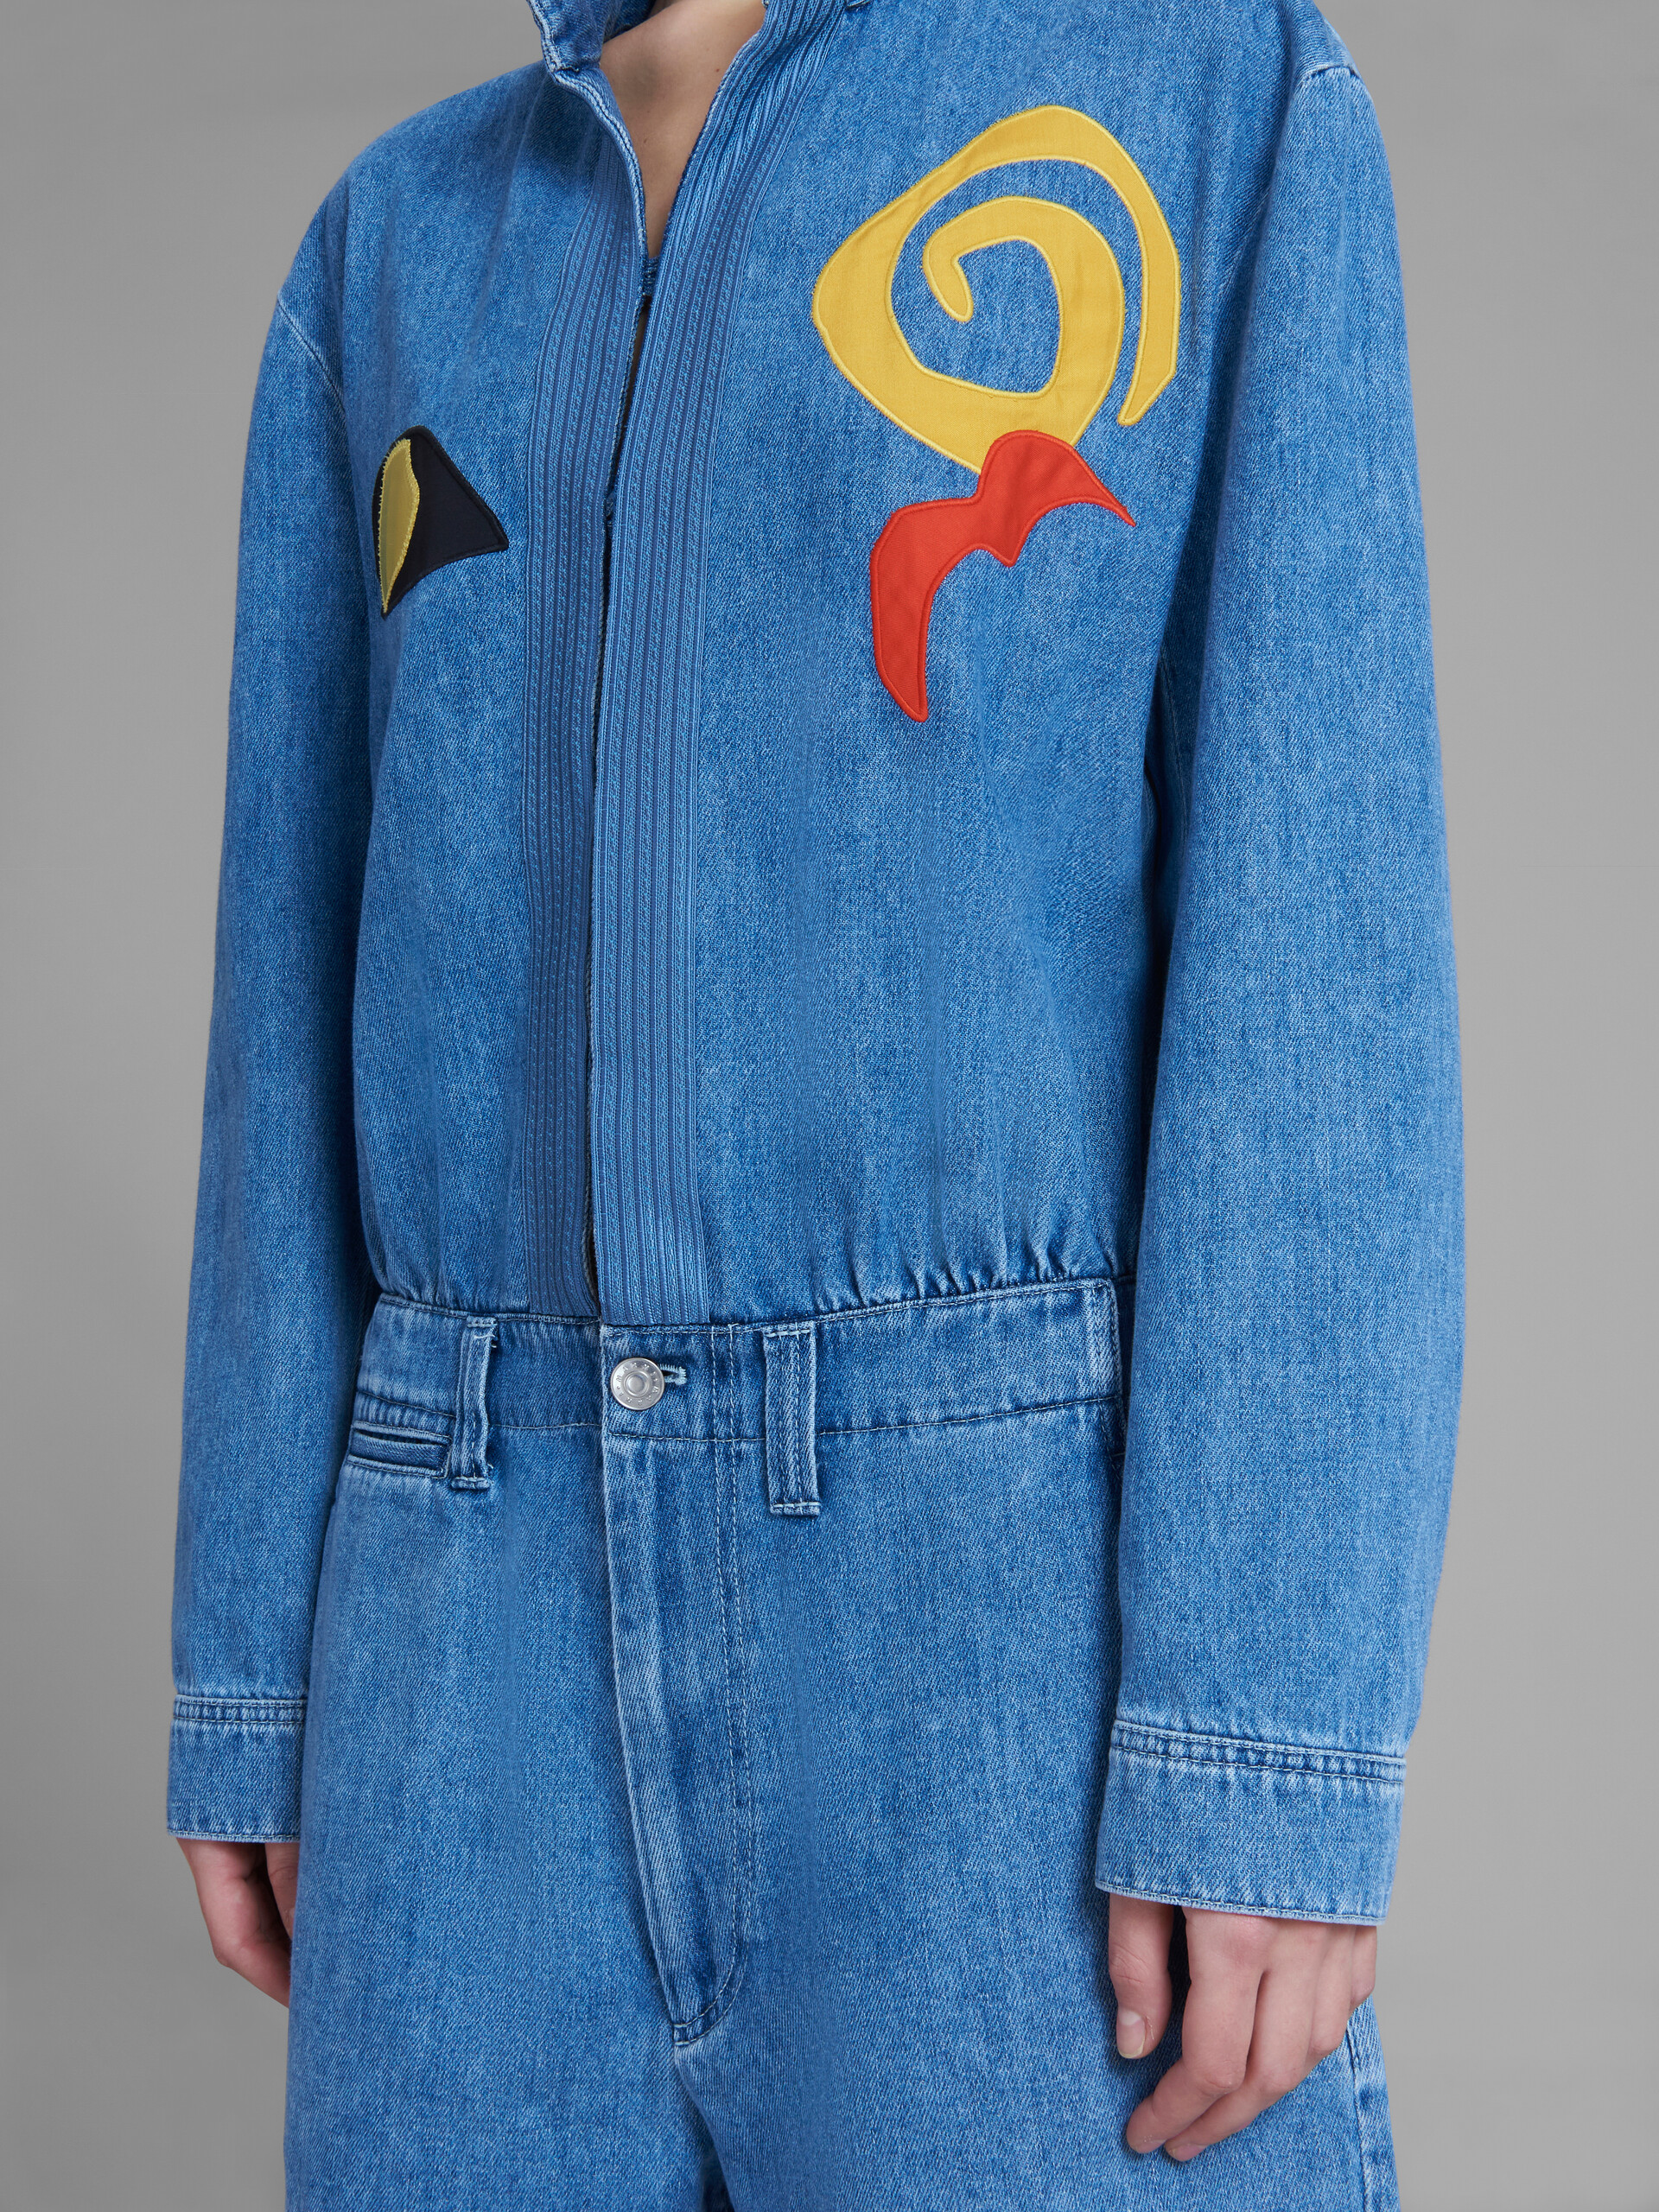 Marni x No Vacancy Inn - Blue chambray jumpsuit with embroidery - Overalls - Image 5